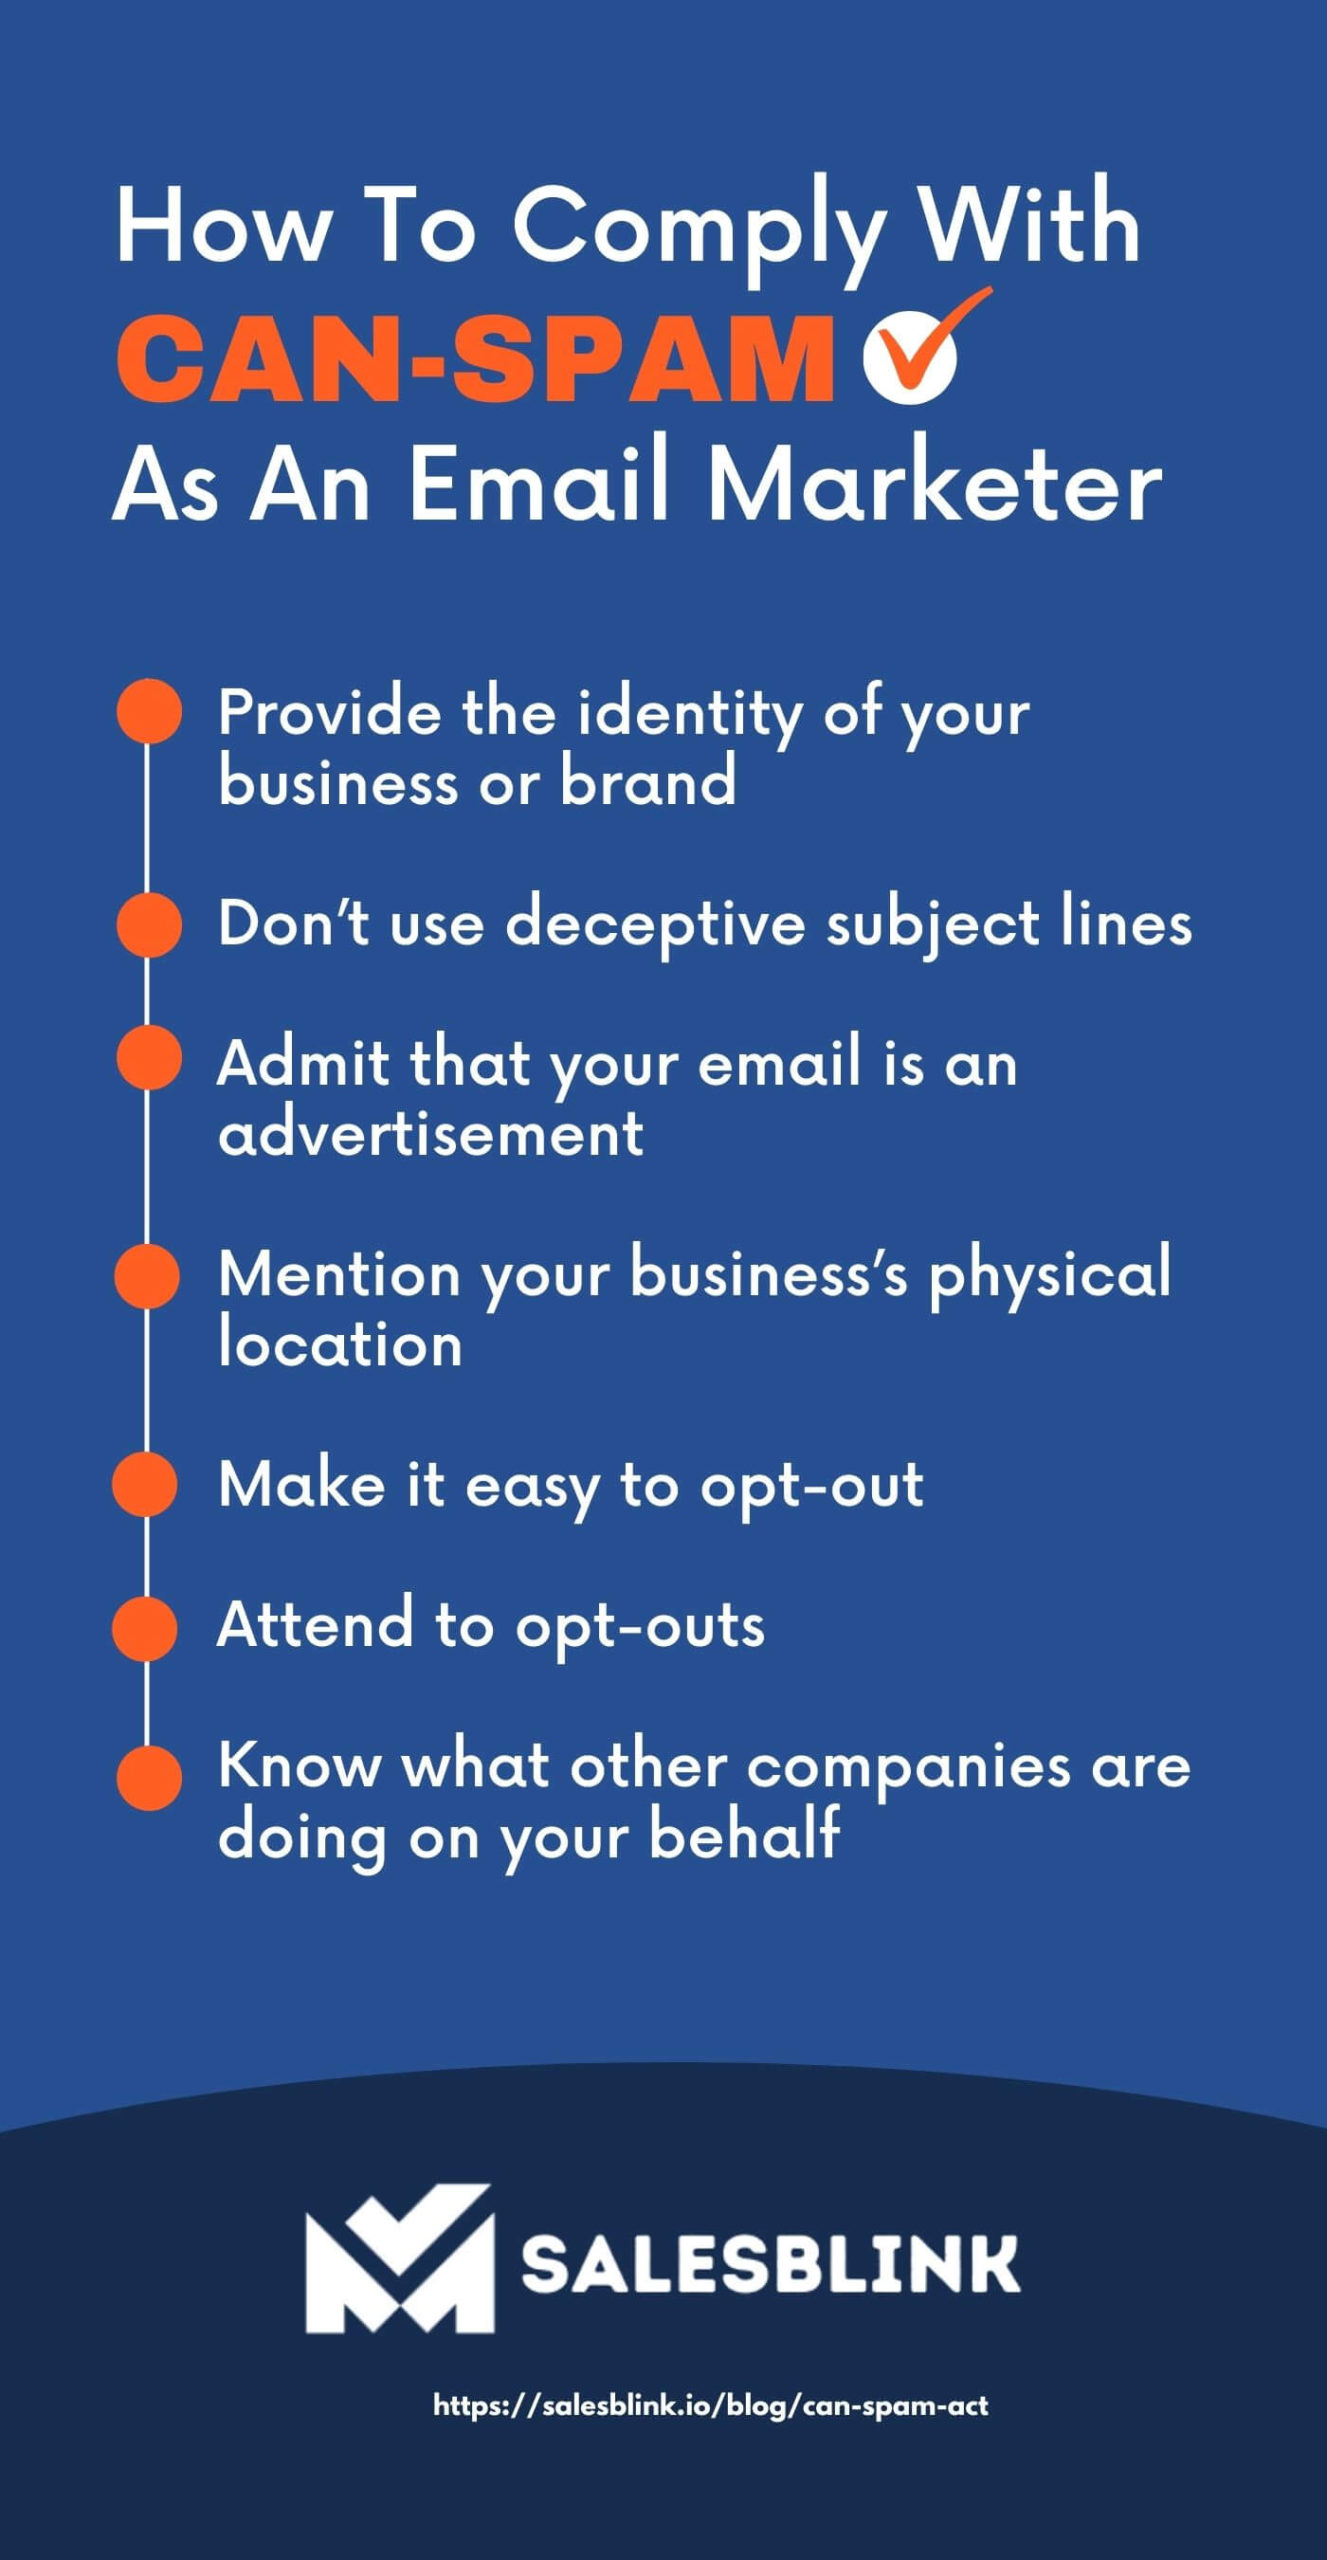 Infographic - How To Comply With CAN-SPAM?